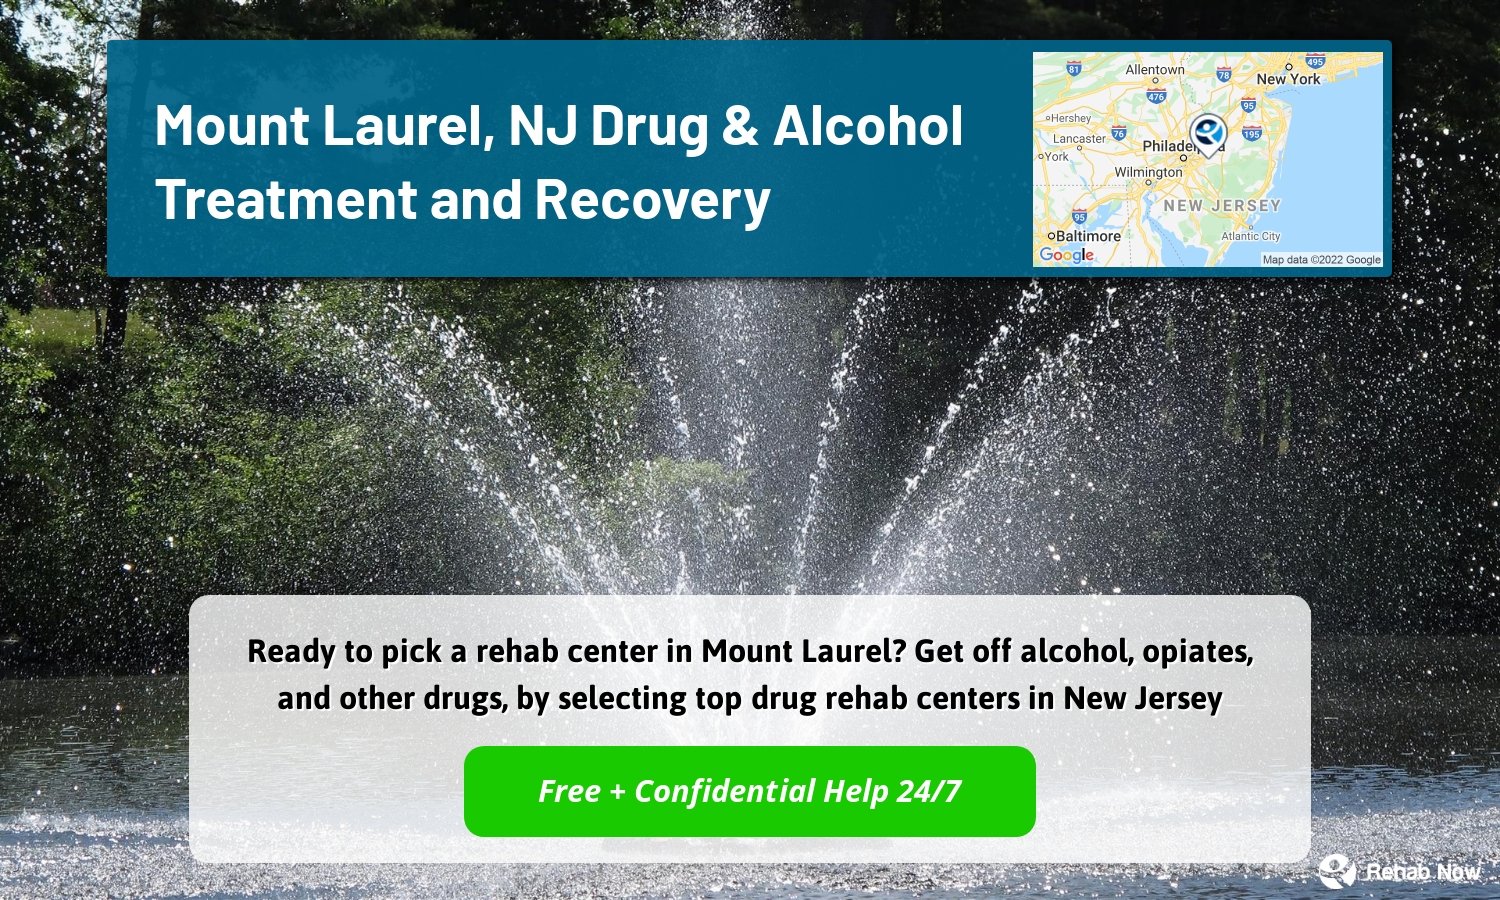 Ready to pick a rehab center in Mount Laurel? Get off alcohol, opiates, and other drugs, by selecting top drug rehab centers in New Jersey